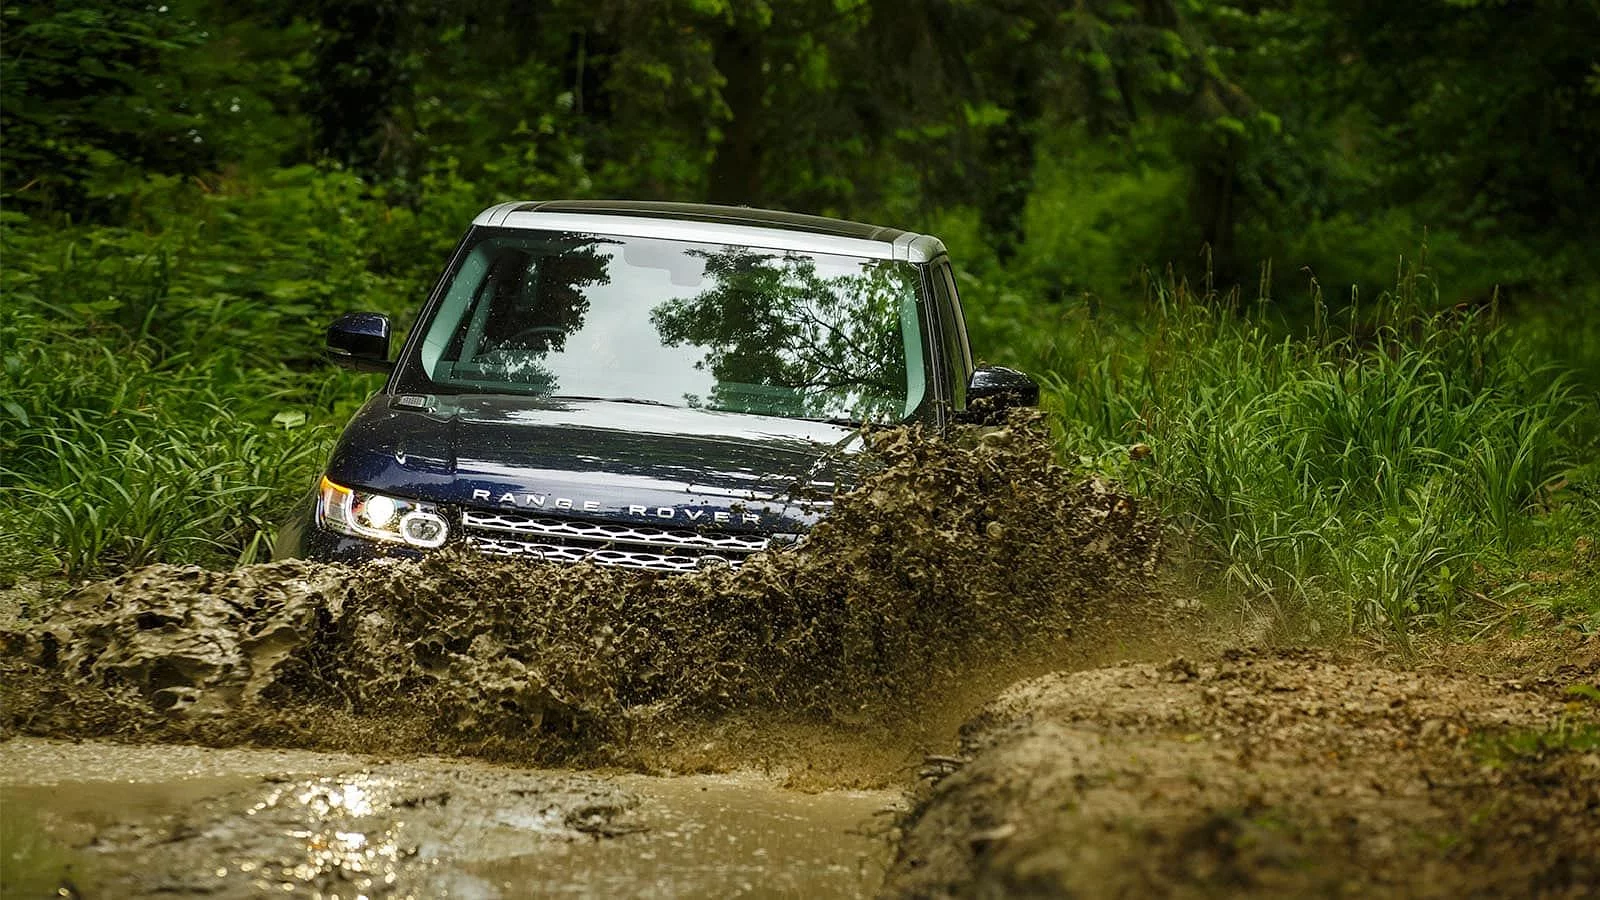 1. EASTNOR CASTLE VE LAND ROVER EXPERIENCE